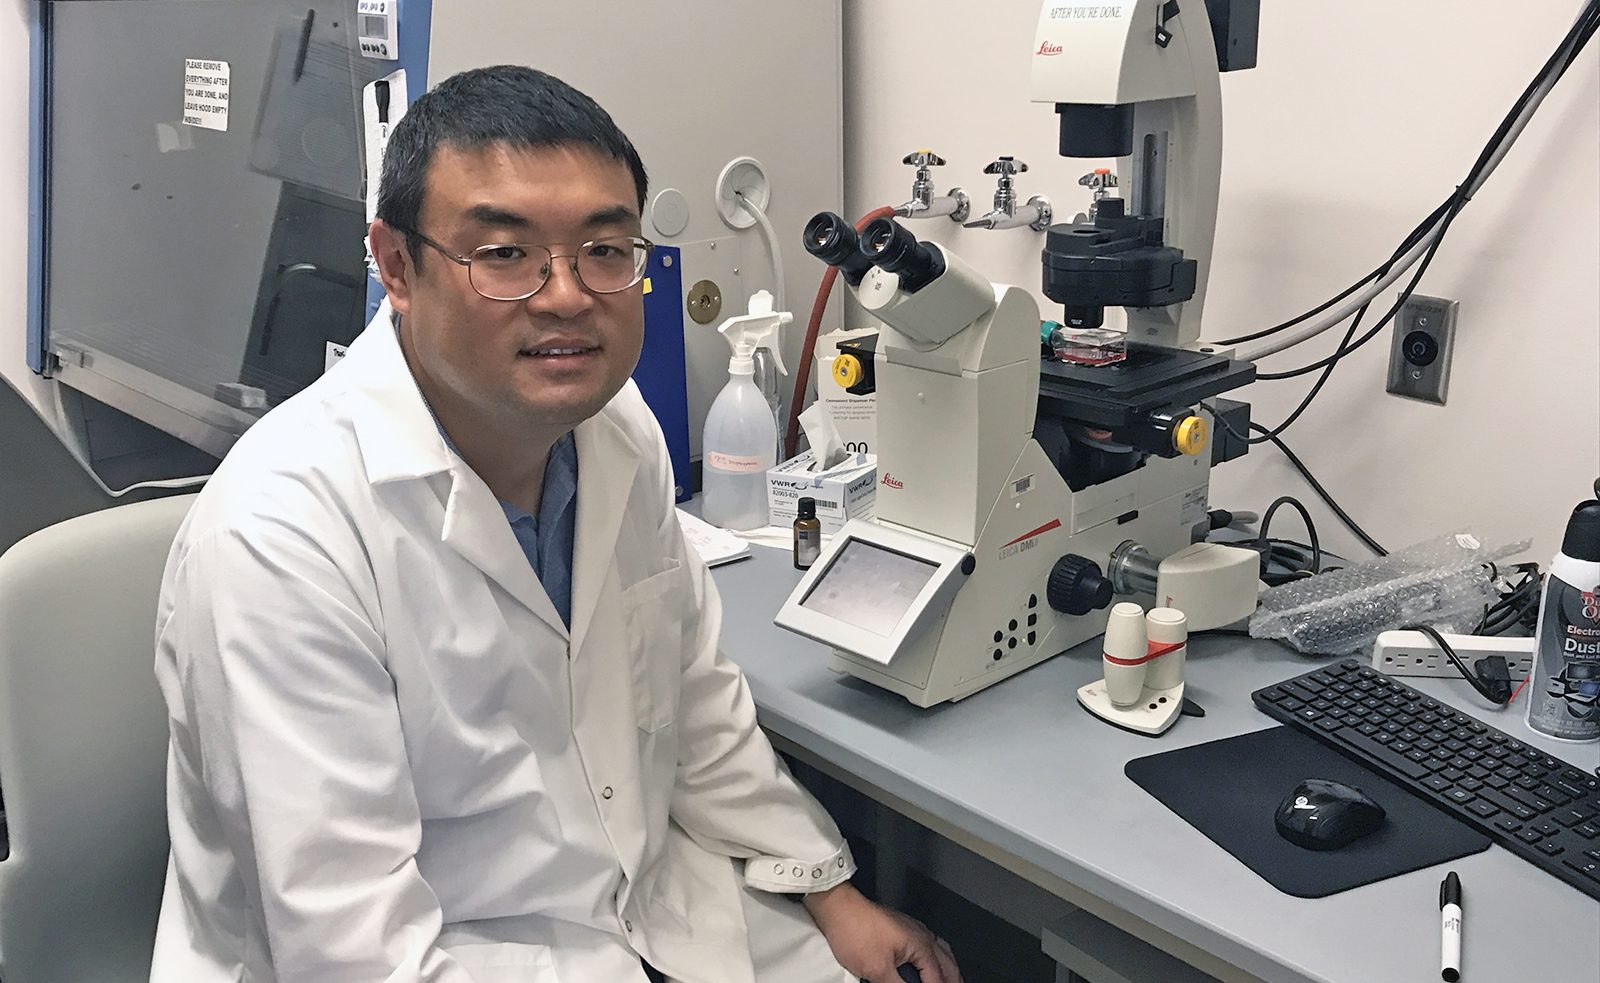 Zhicheng Dou sitting at microscope in his lab